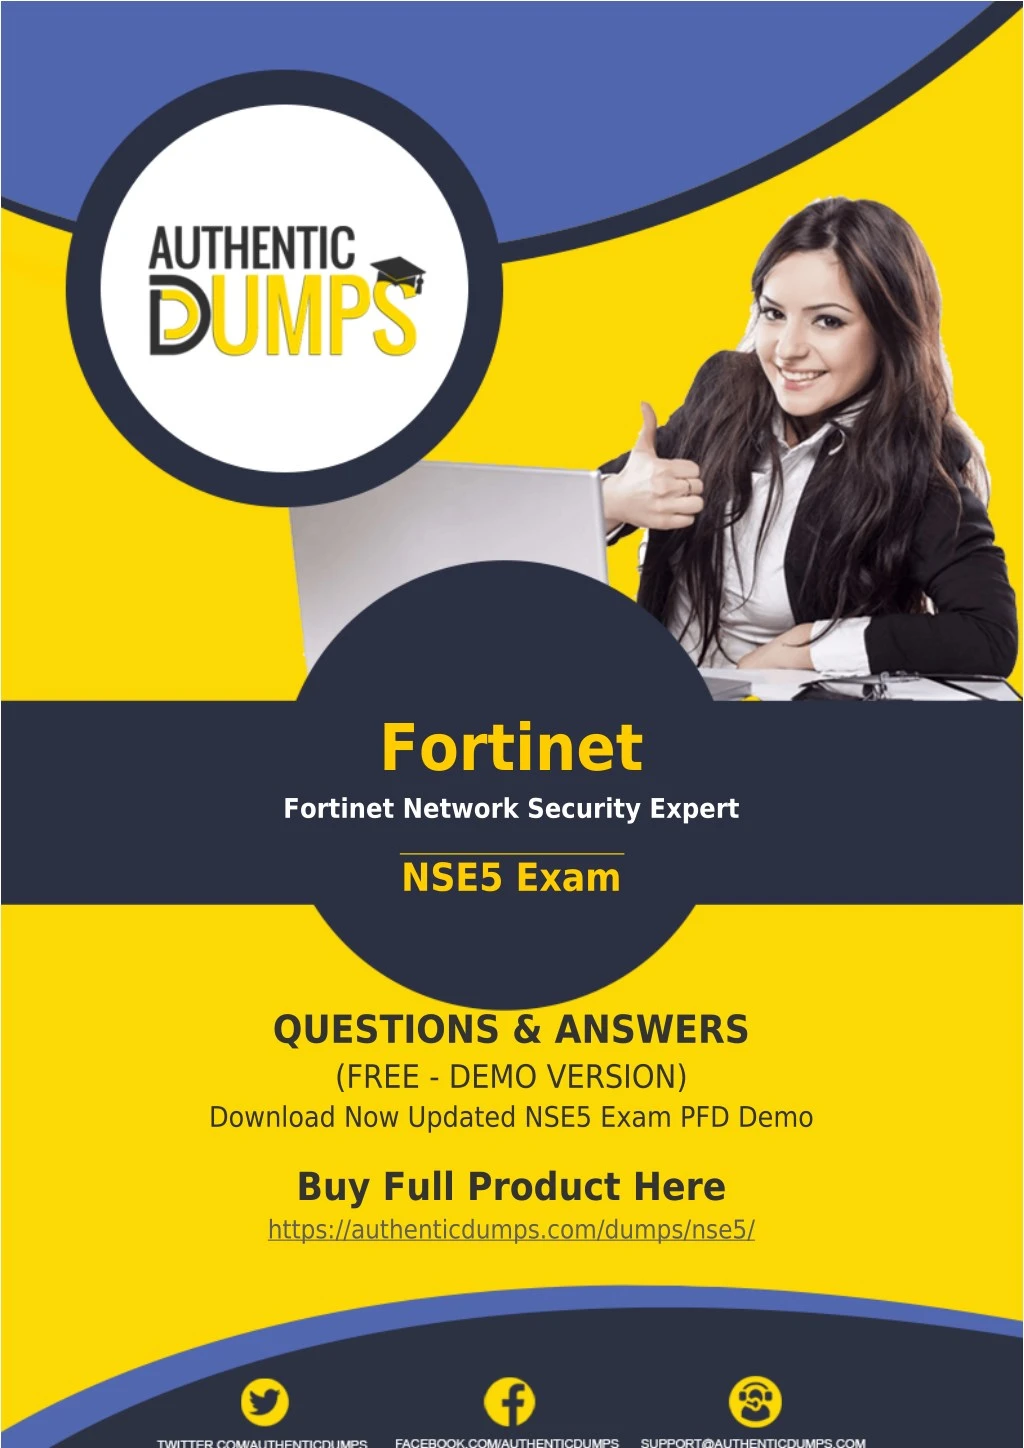 fortinet fortinet network security expert